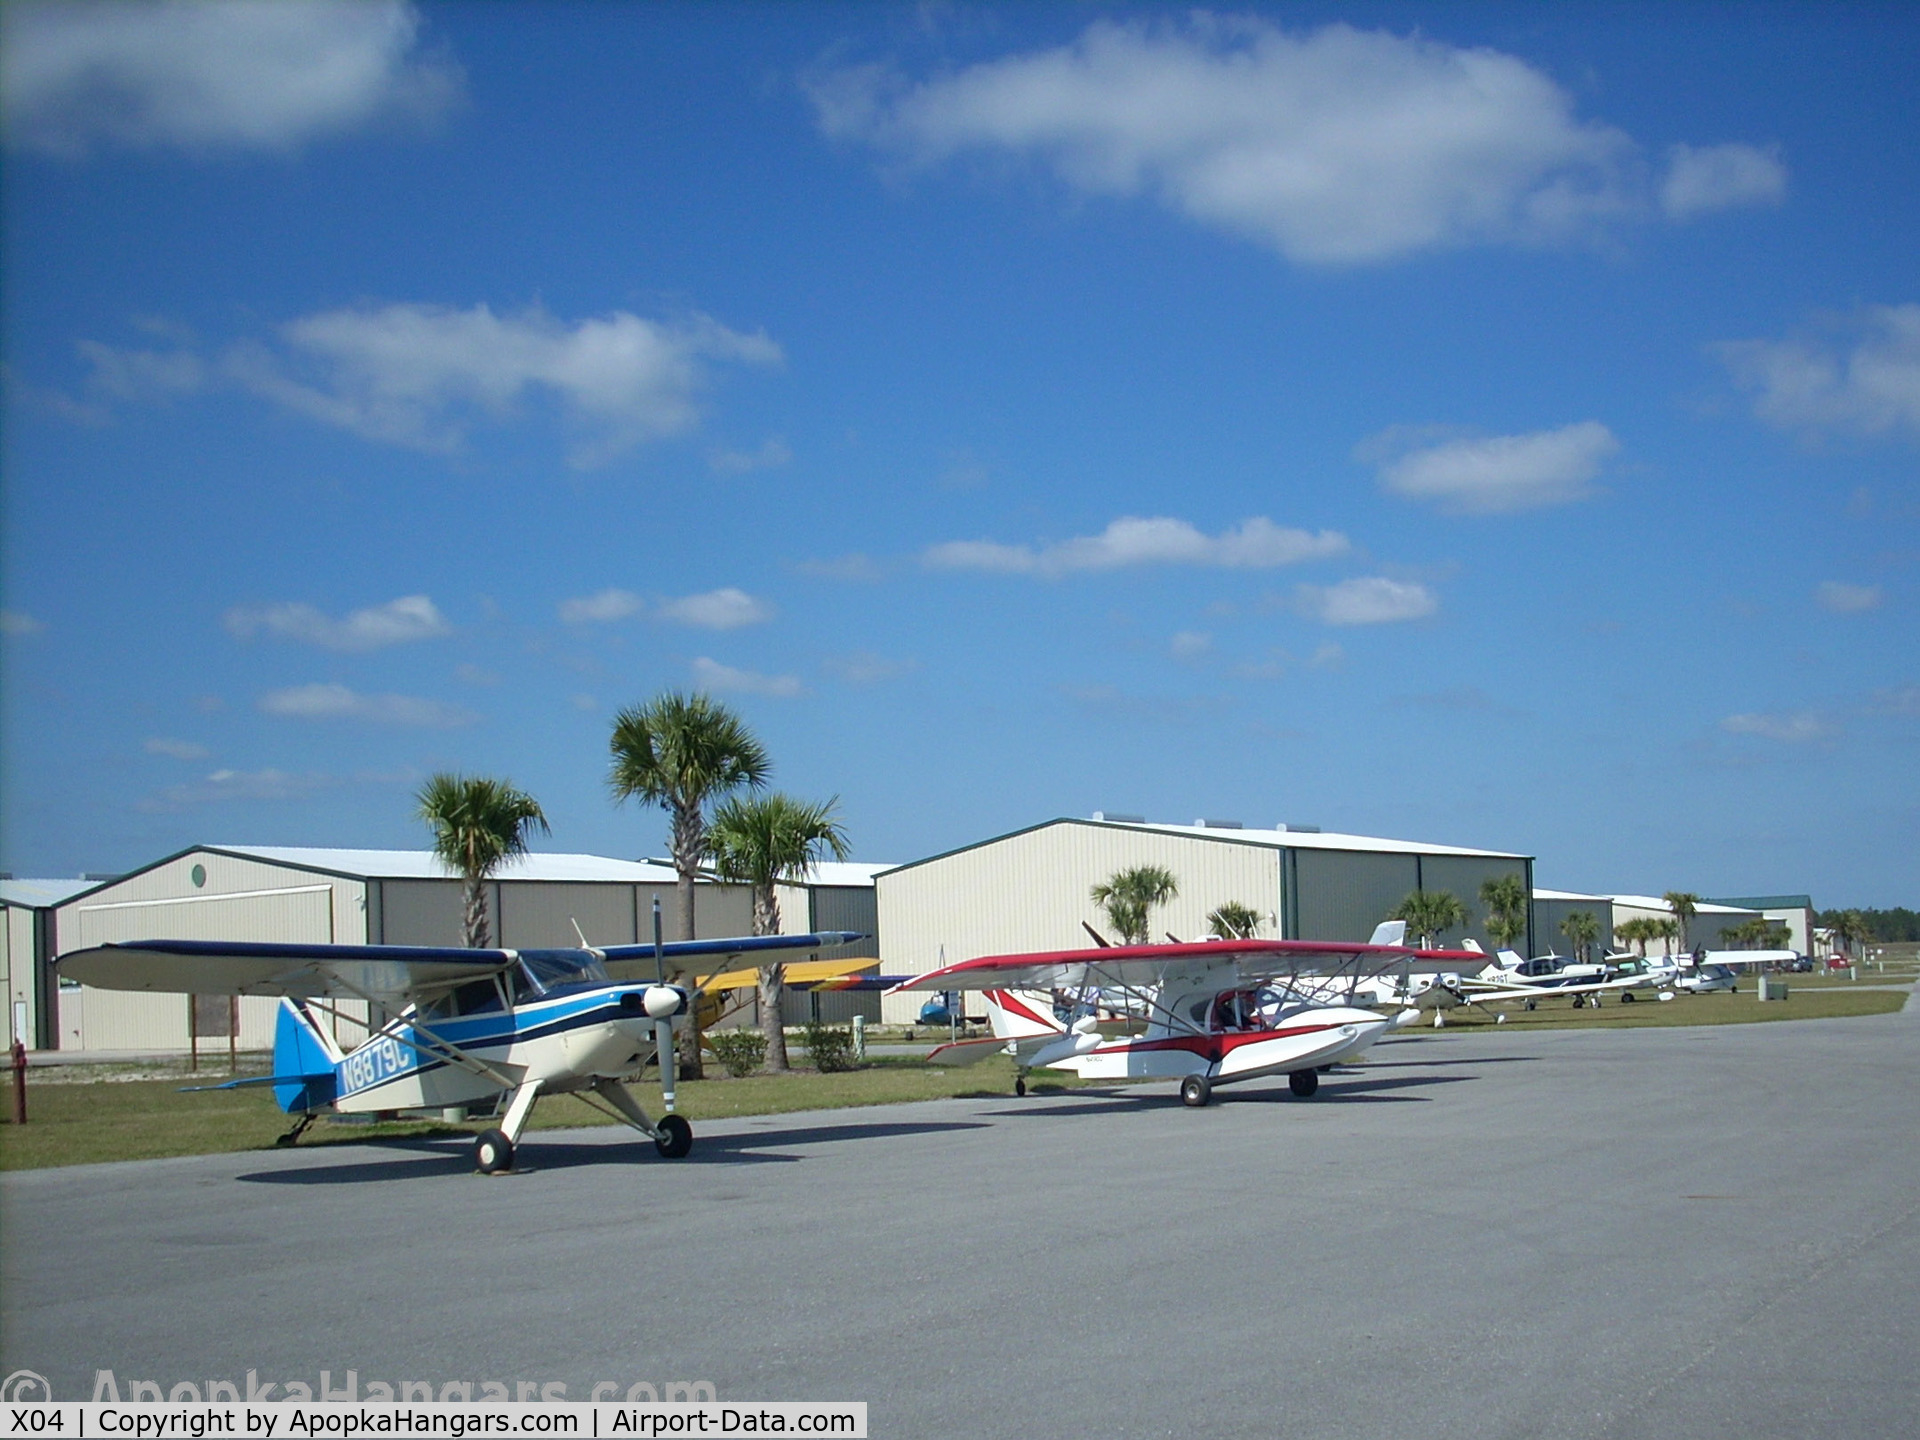 Orlando Apopka Airport (X04) - Fly-in at X04.